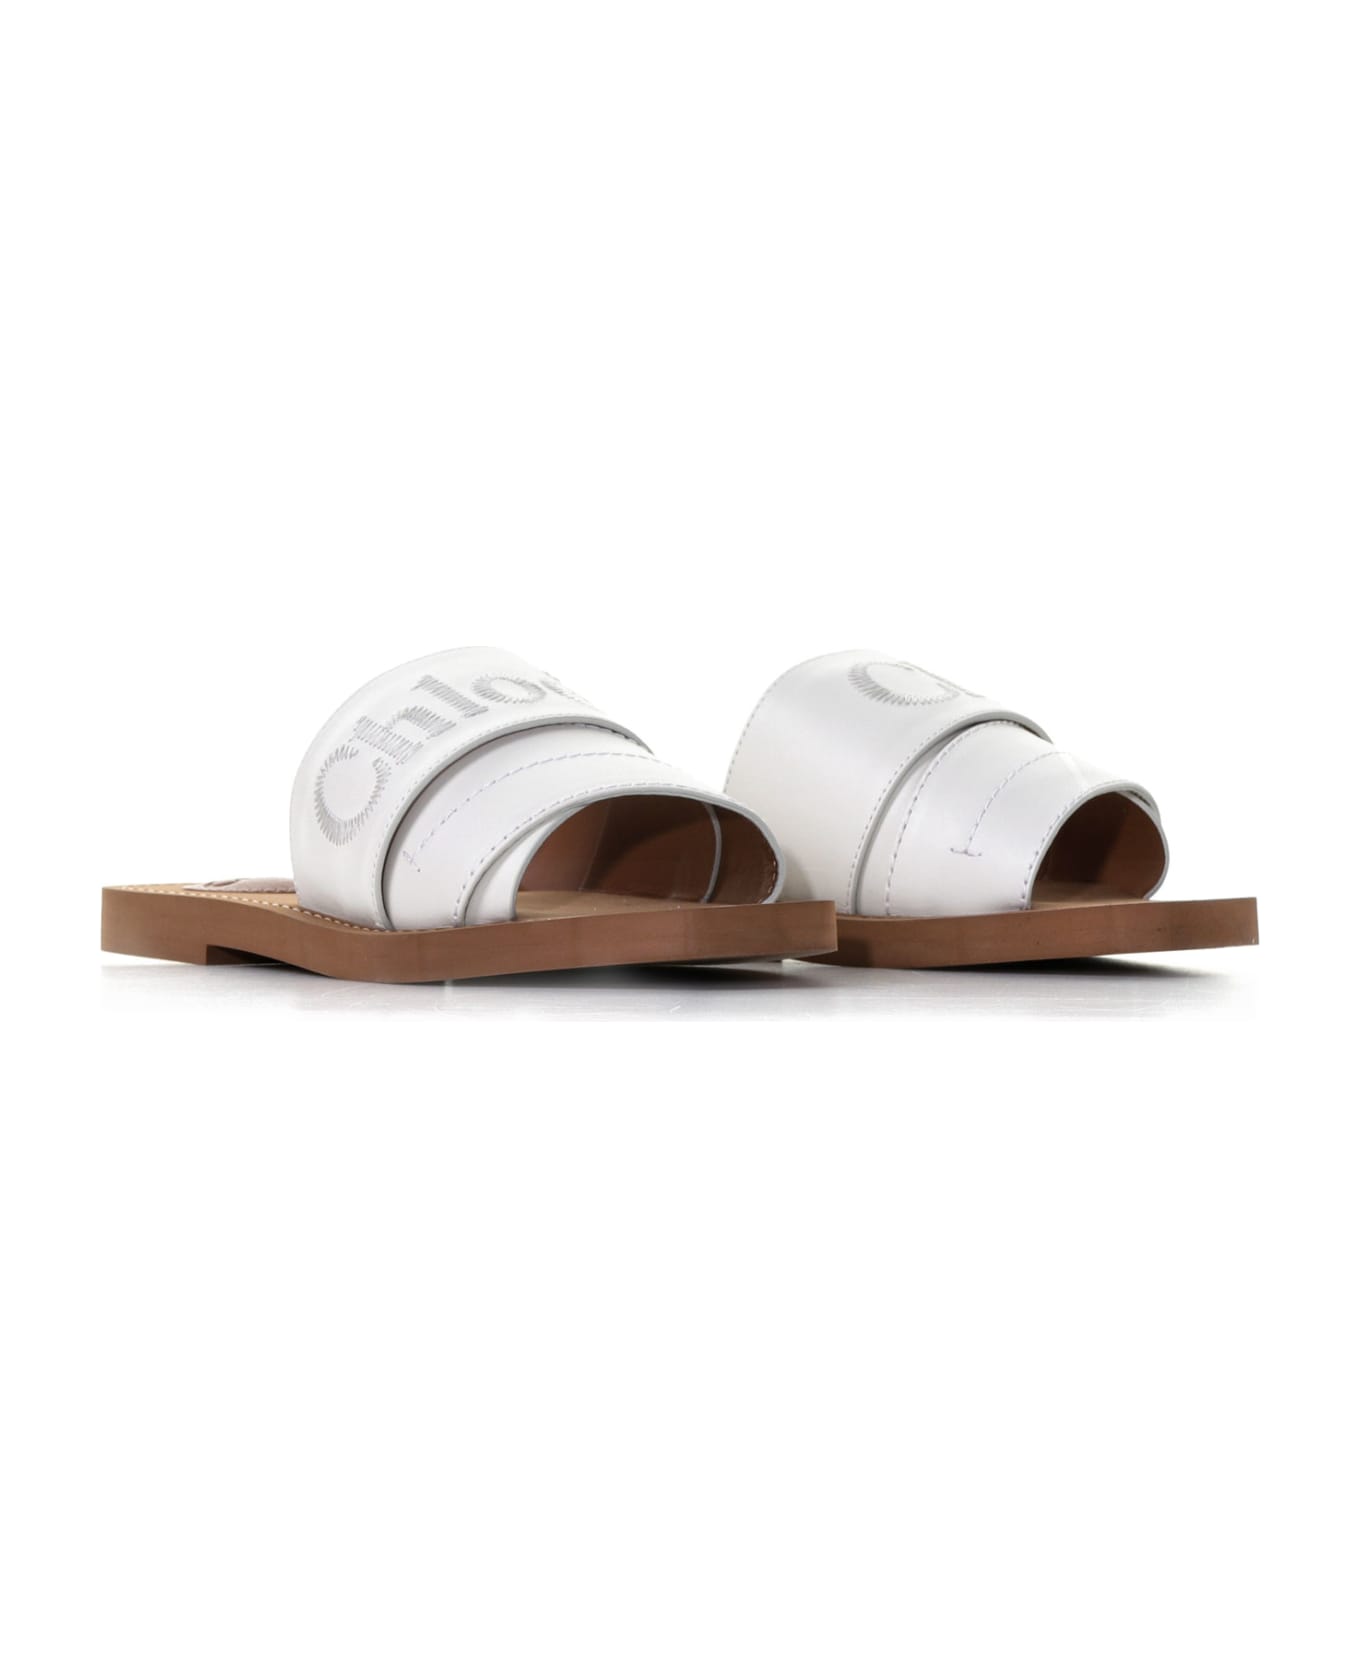 Chloé Woody Smooth Leather Slide Sandals - WHITE